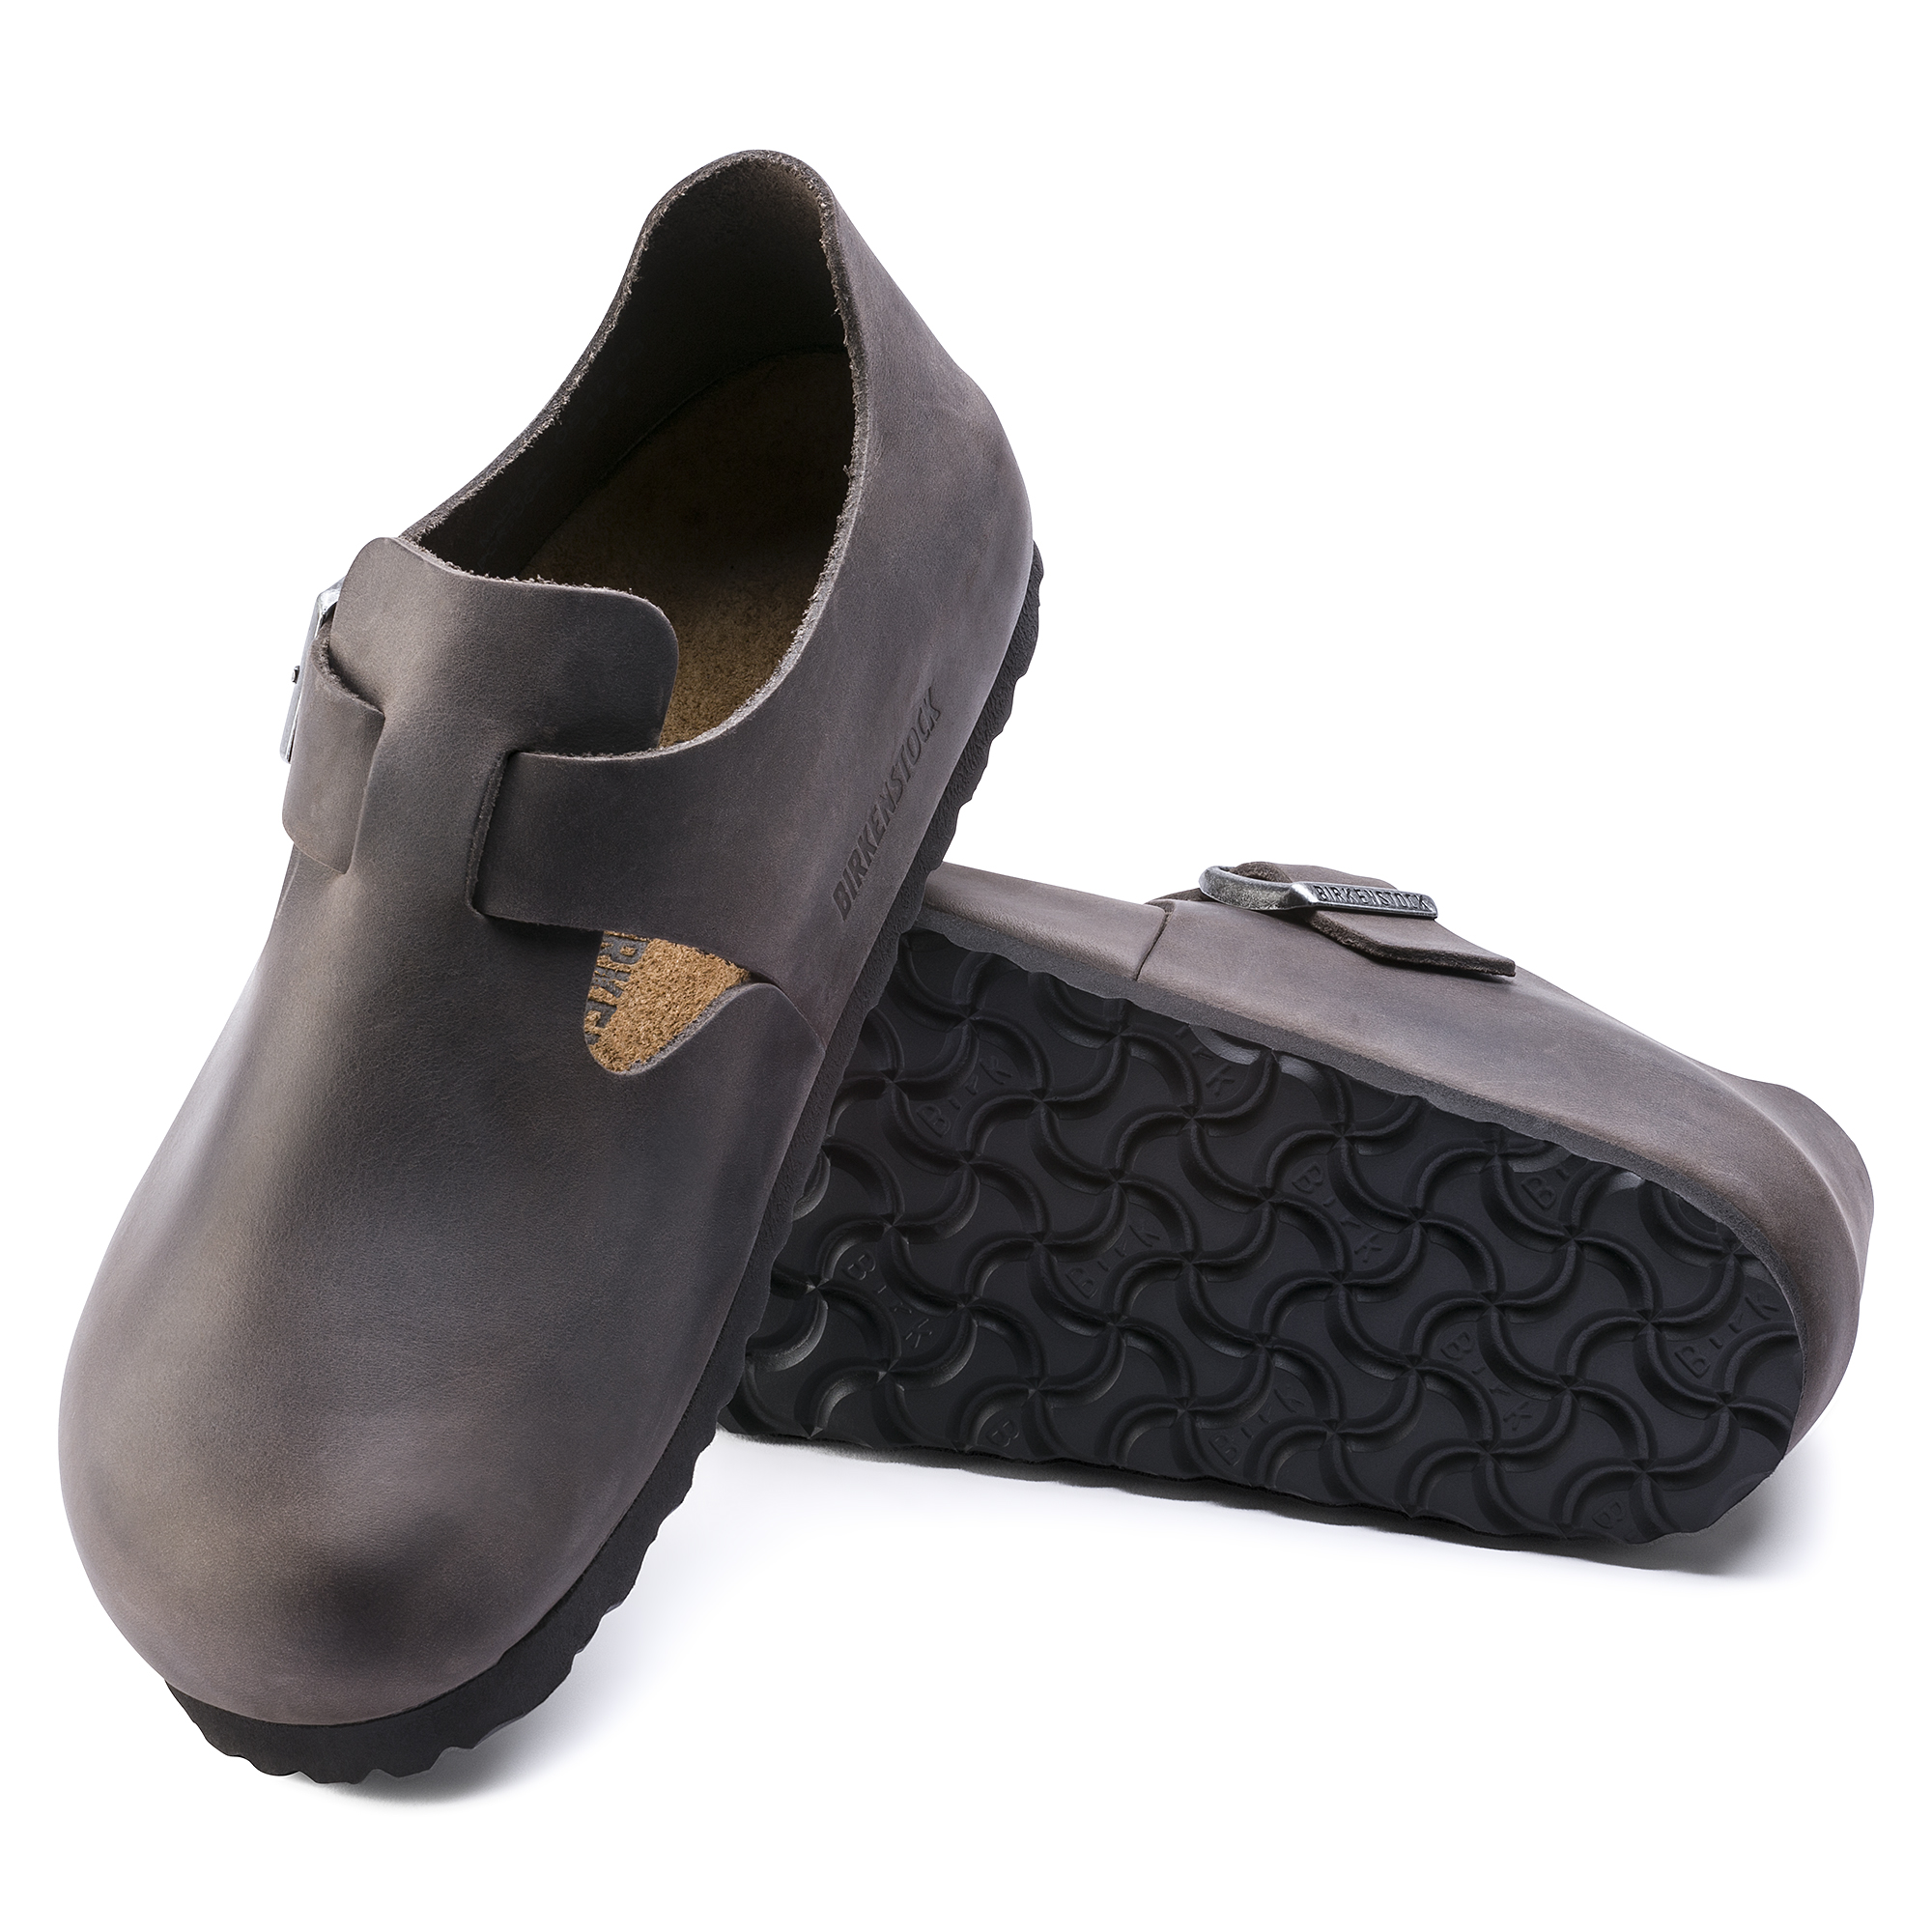 London Oiled Leather Iron | shop online at BIRKENSTOCK